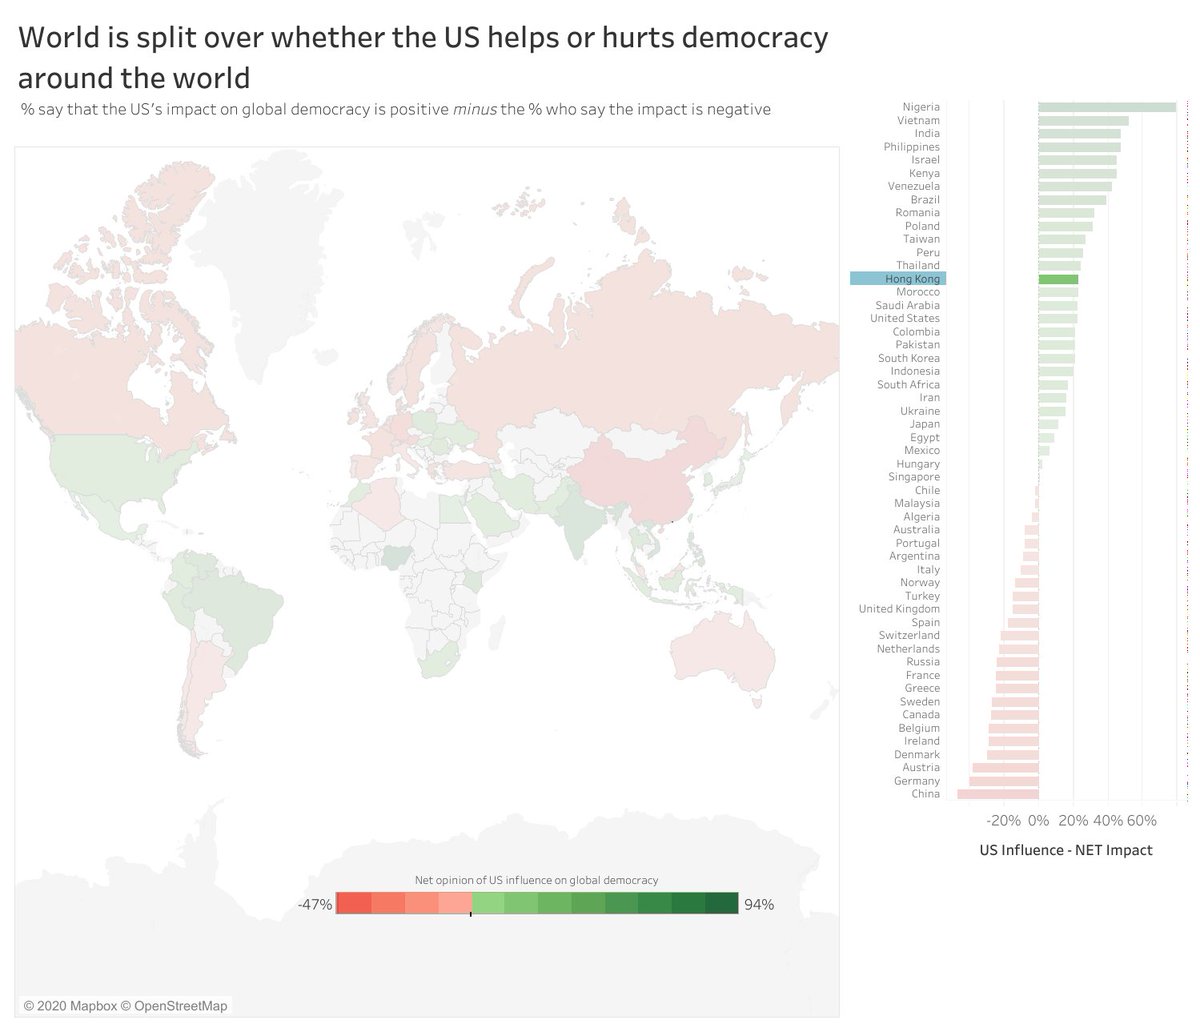 On whether the US helps/hurt global democracy, 23% of the respondents from HK rate it positively; the figure has risen by 4% from last year. The figure for China sees the largest proportion (47%) of its respondents rating it negatively: the figure has dropped by 42% from 2019.